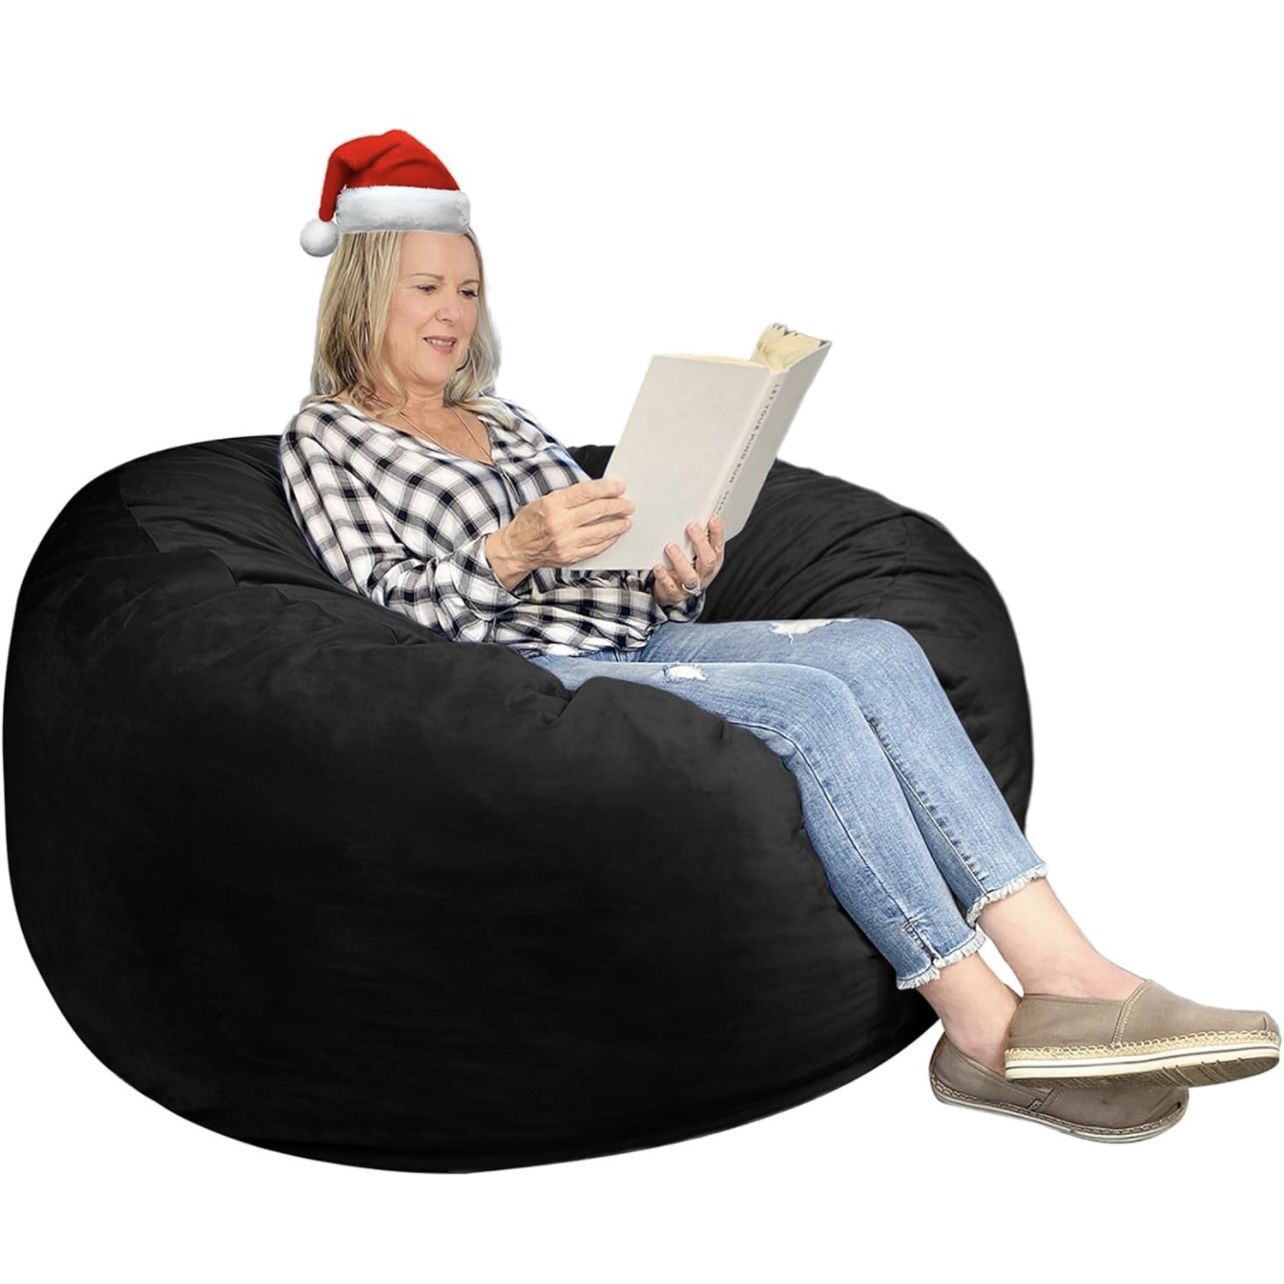 3 ft Bean Bag Chair: 3' Memory Foam Bean Bag Chairs for Adults with Filling, Soft Bean Bag Sofa with Premium Velvet Cover,Bean Bags with Stuffed Foam 